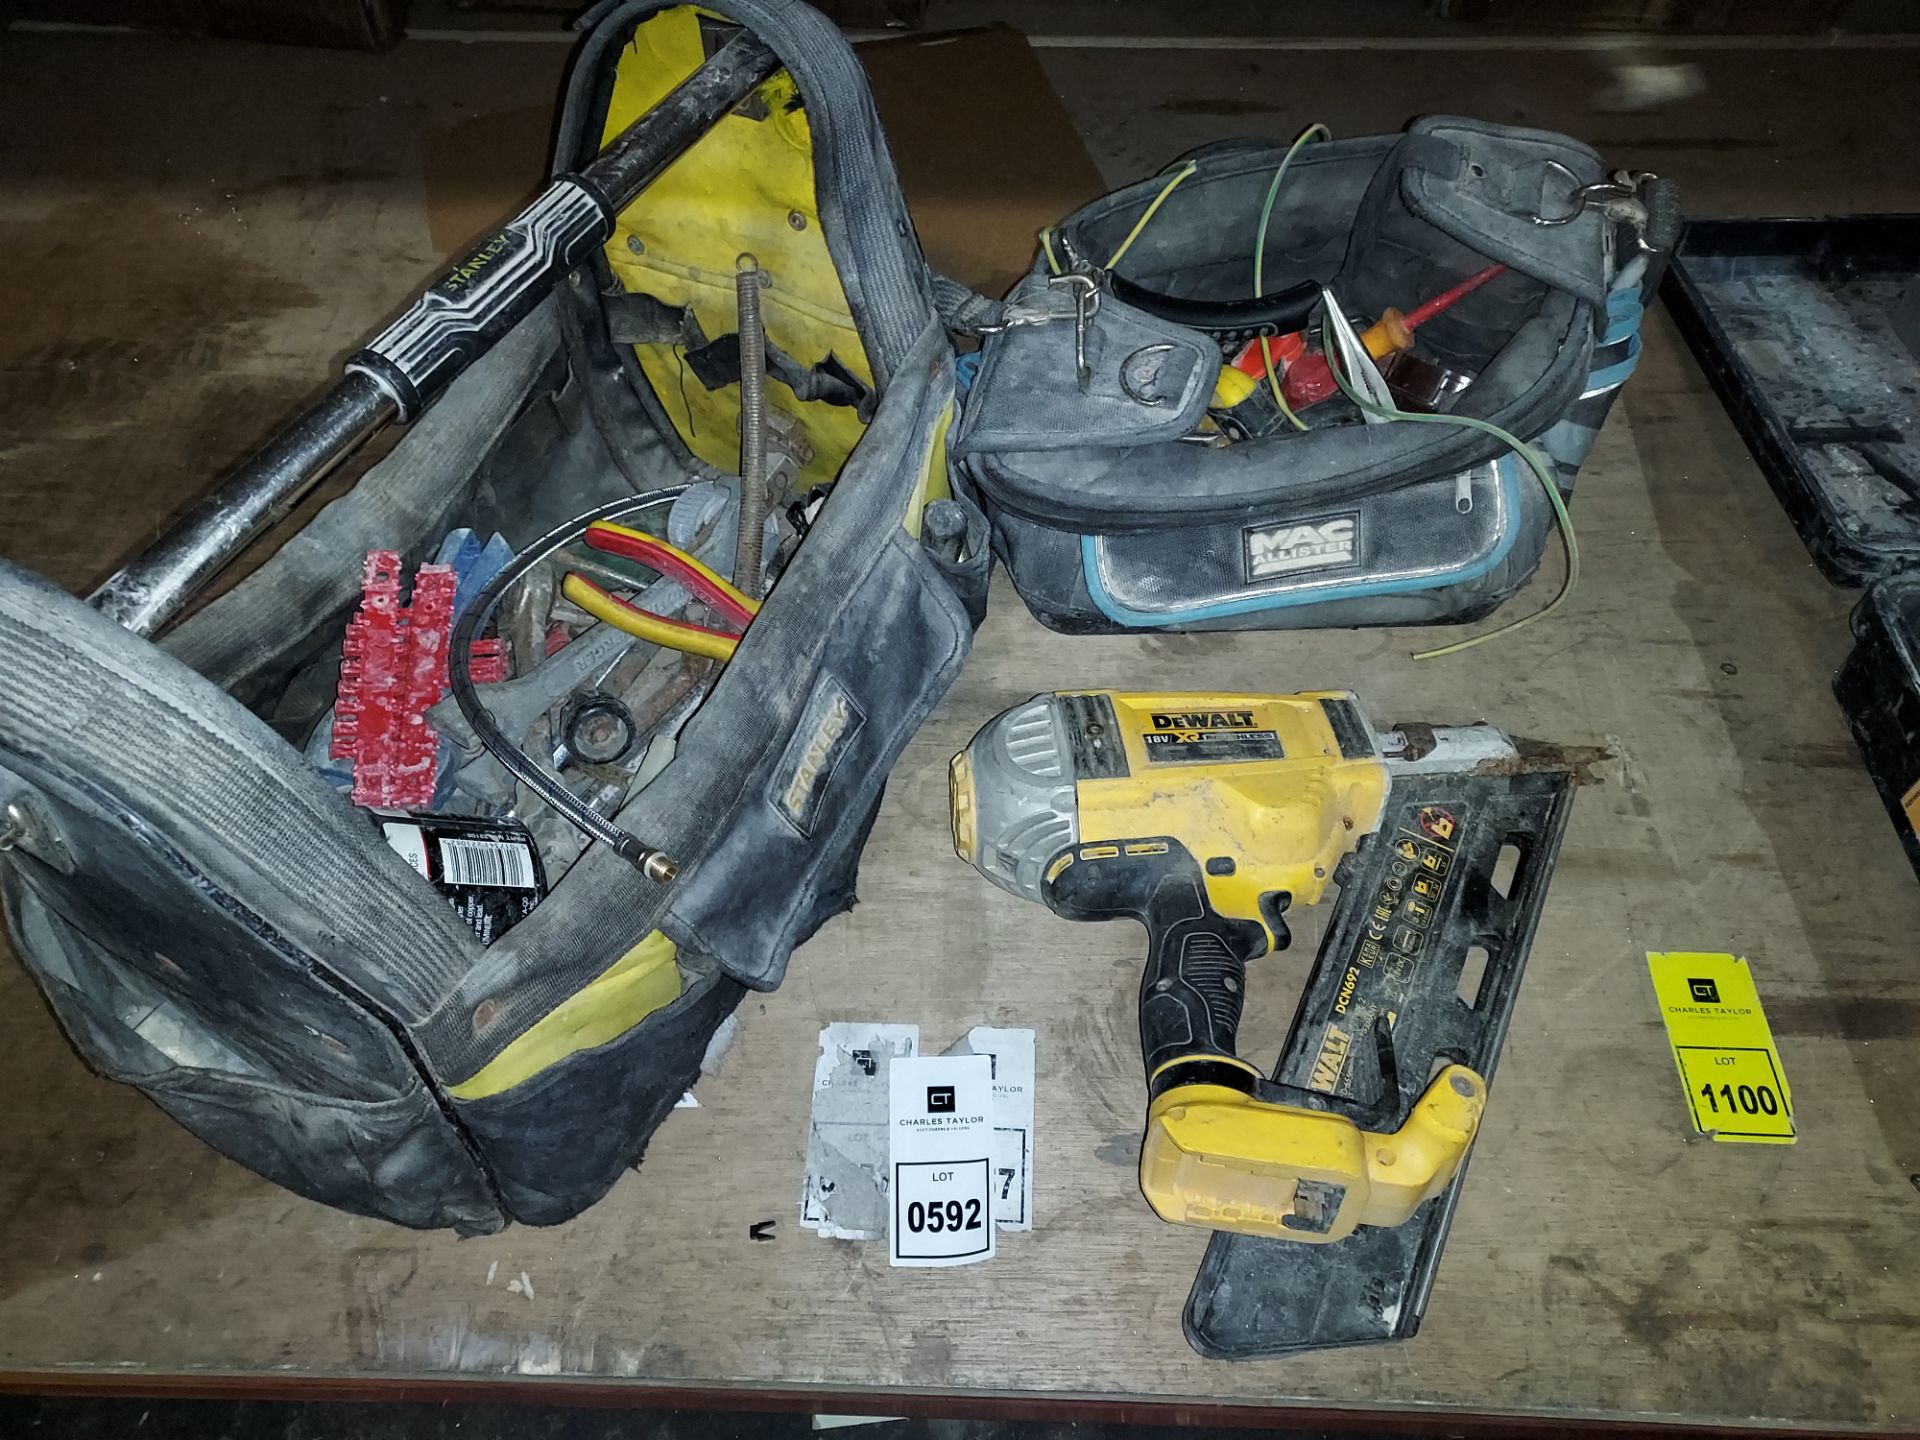 1 X DEWALT CORDLESS NAIL GUN 18V ( DCN692) - PLEASE NOTE THIS IS POOR CONDITION - RUST ) AND 2 X